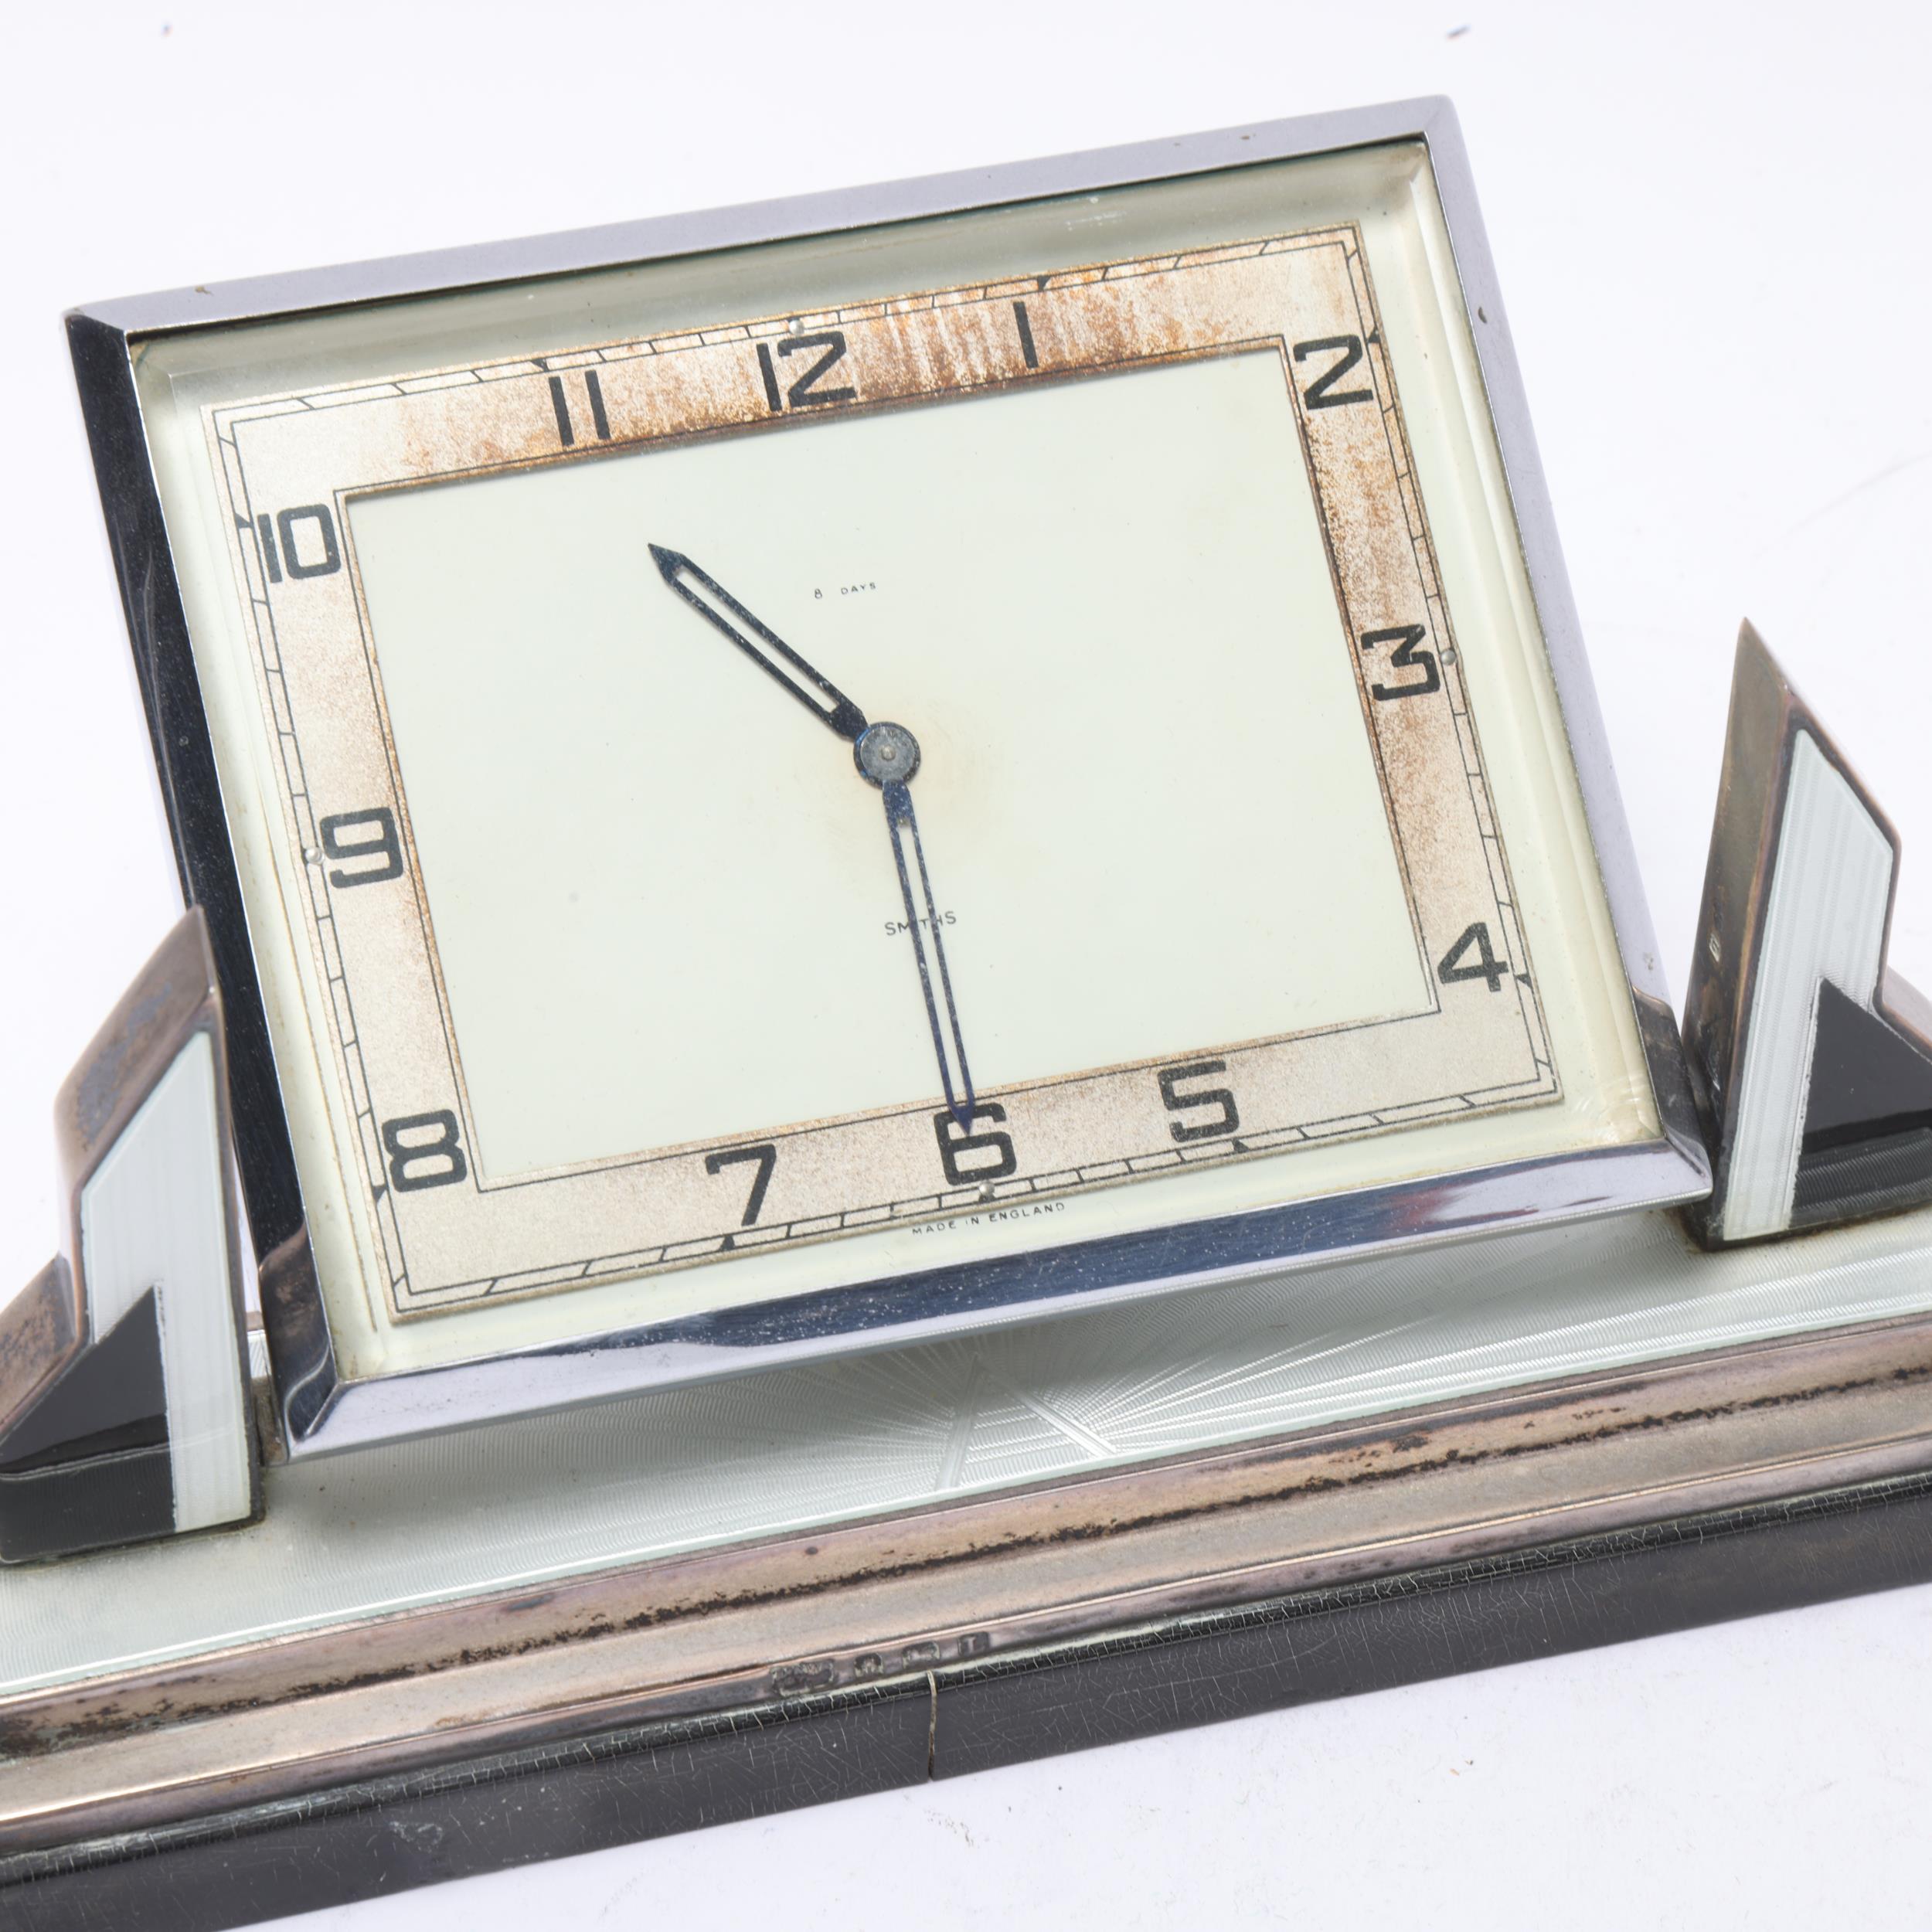 Smiths Art Deco silver black and white enamel and chrome cased mantel clock, 8-day movement with - Image 3 of 3